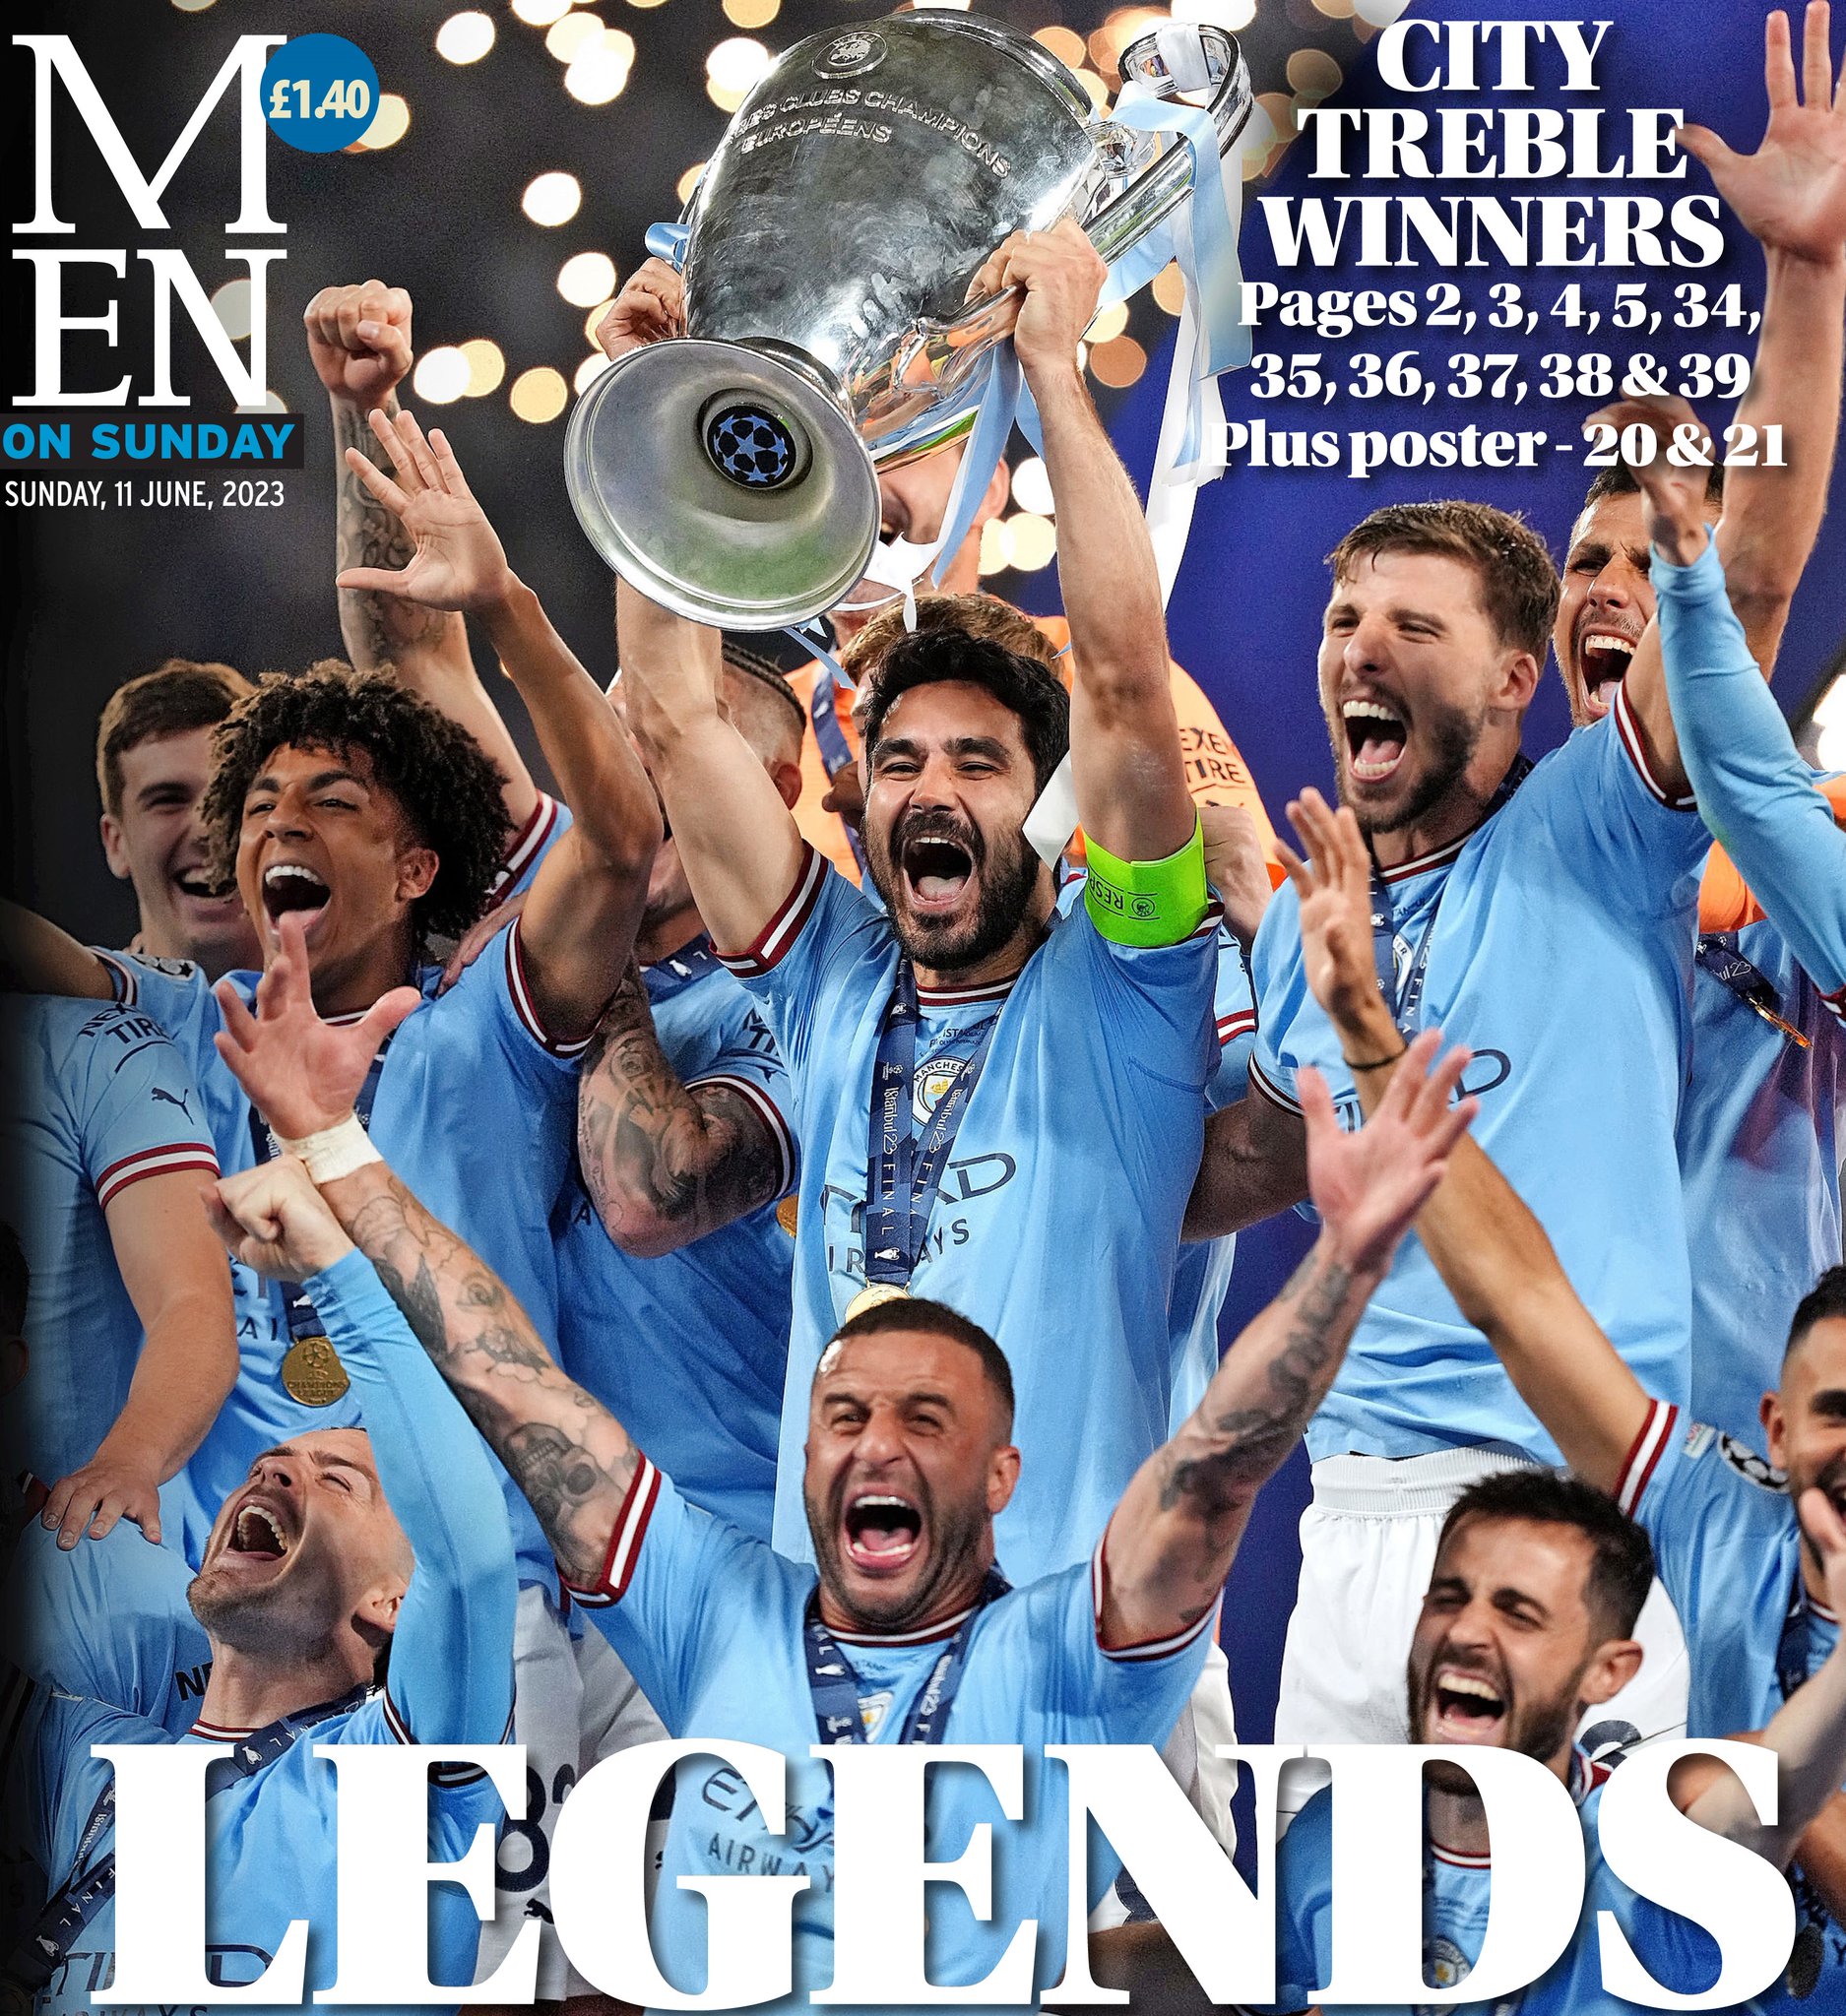 Manchester City News up your copy of the MEN on Sunday after a historic win for Manchester City in the Champions League final #mcfc